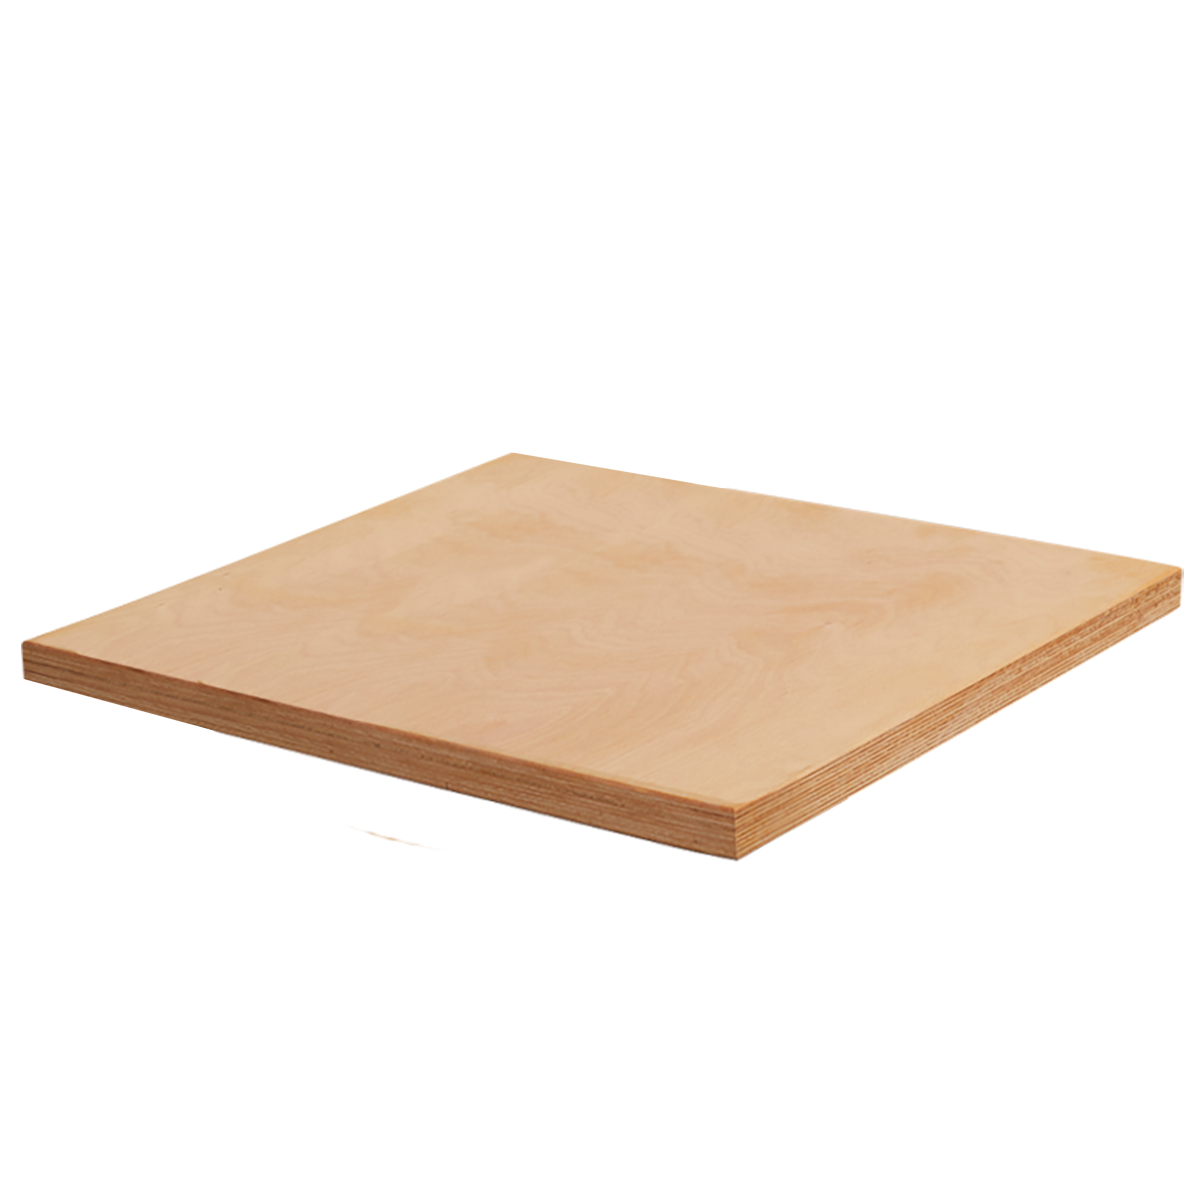 Beech plywood bench top for 1 piece of furniture - 680*690